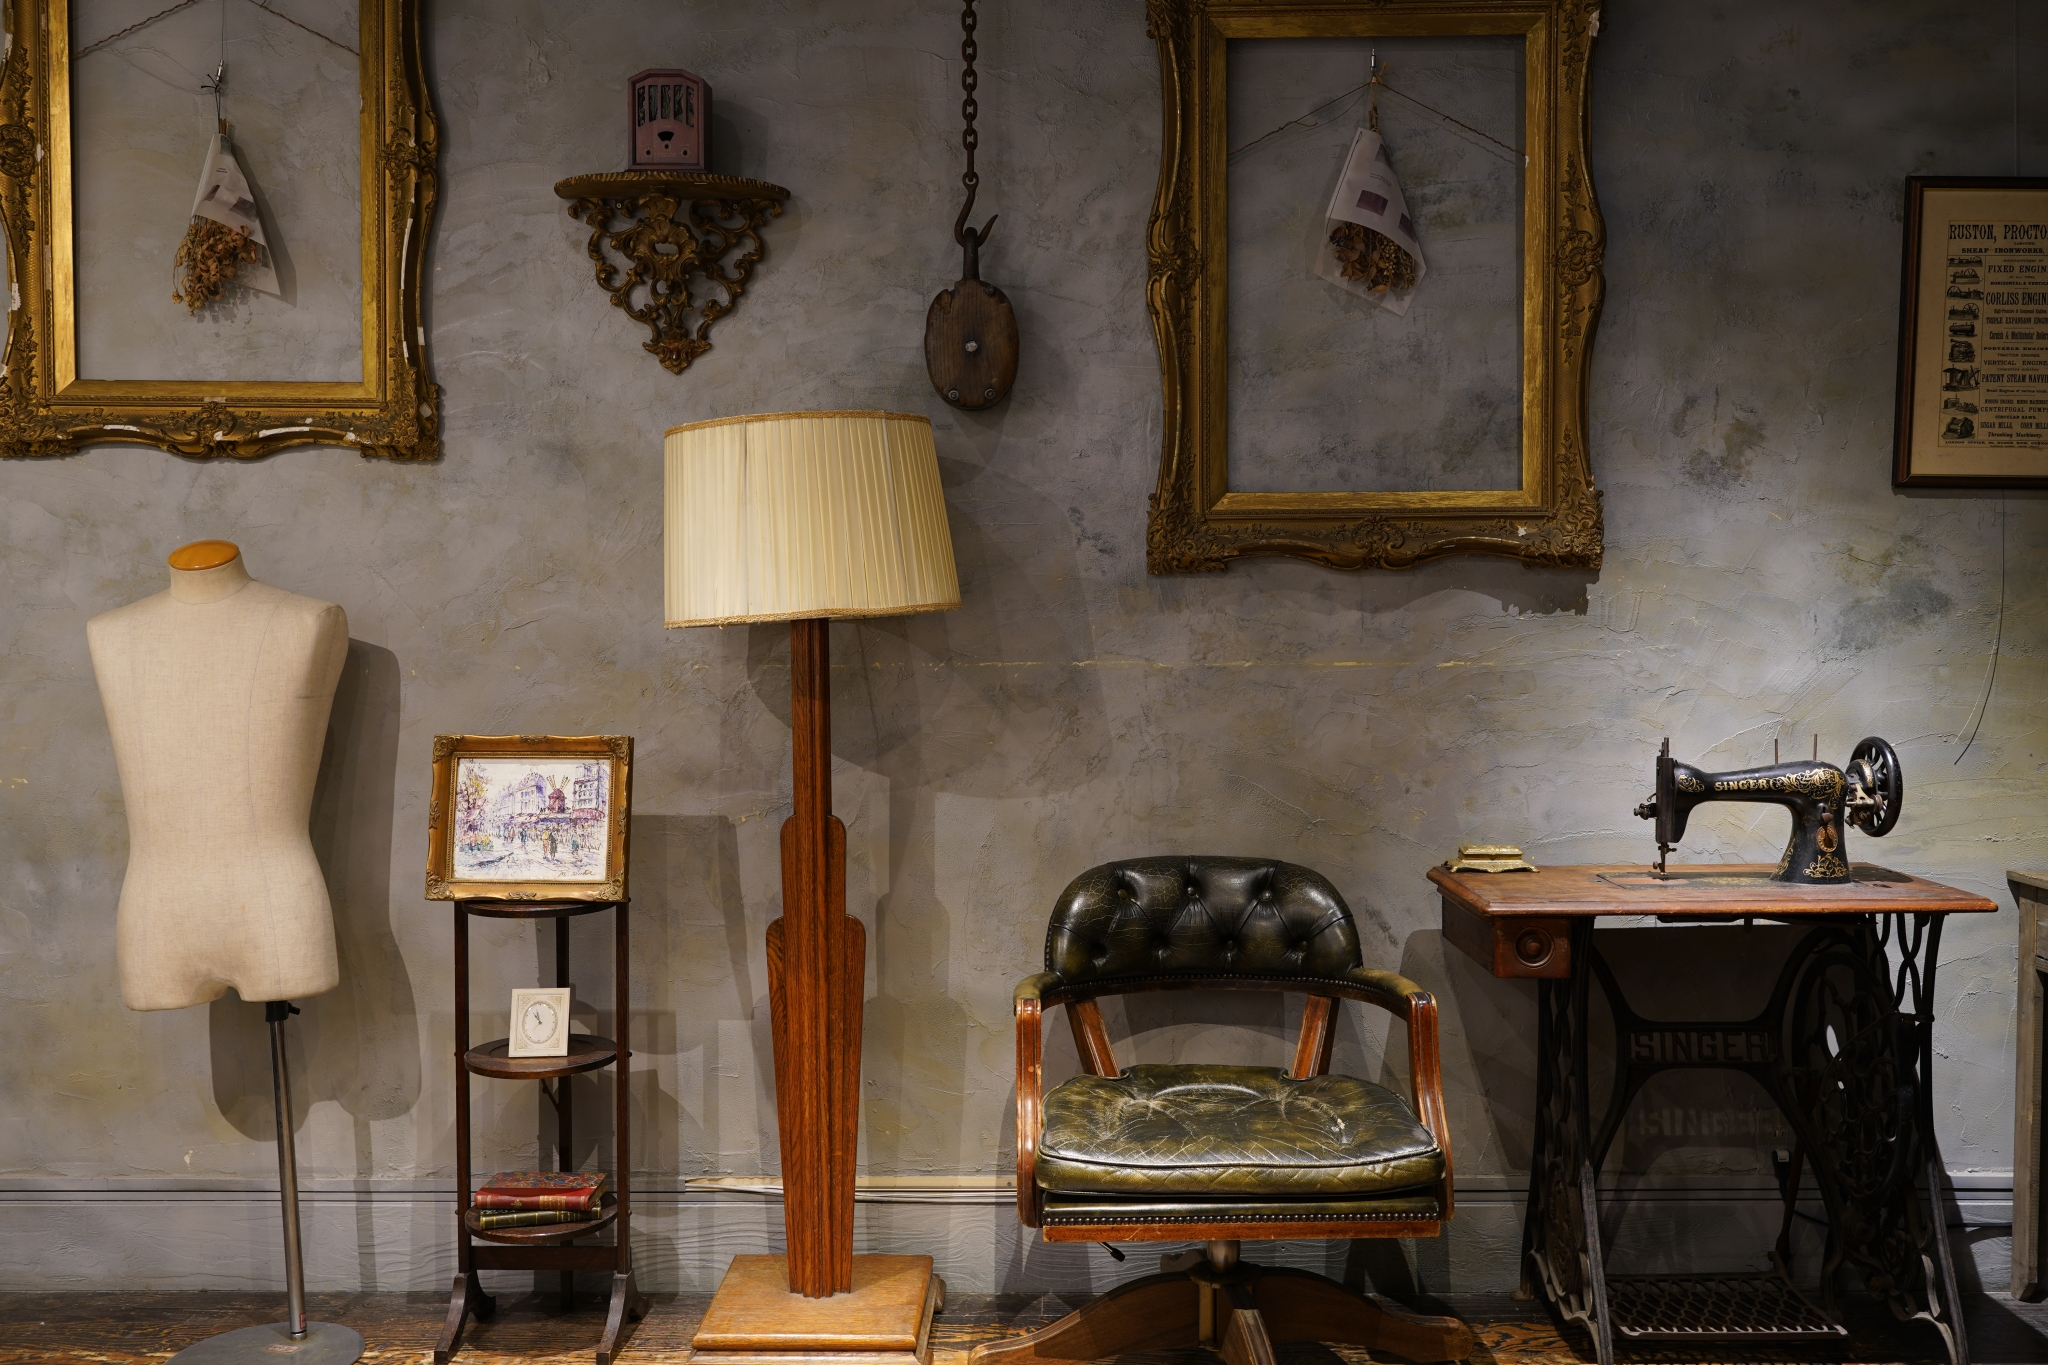 Collection of old-fashioned objects including picture frames, a lamp, a bust, and dark green leather chair